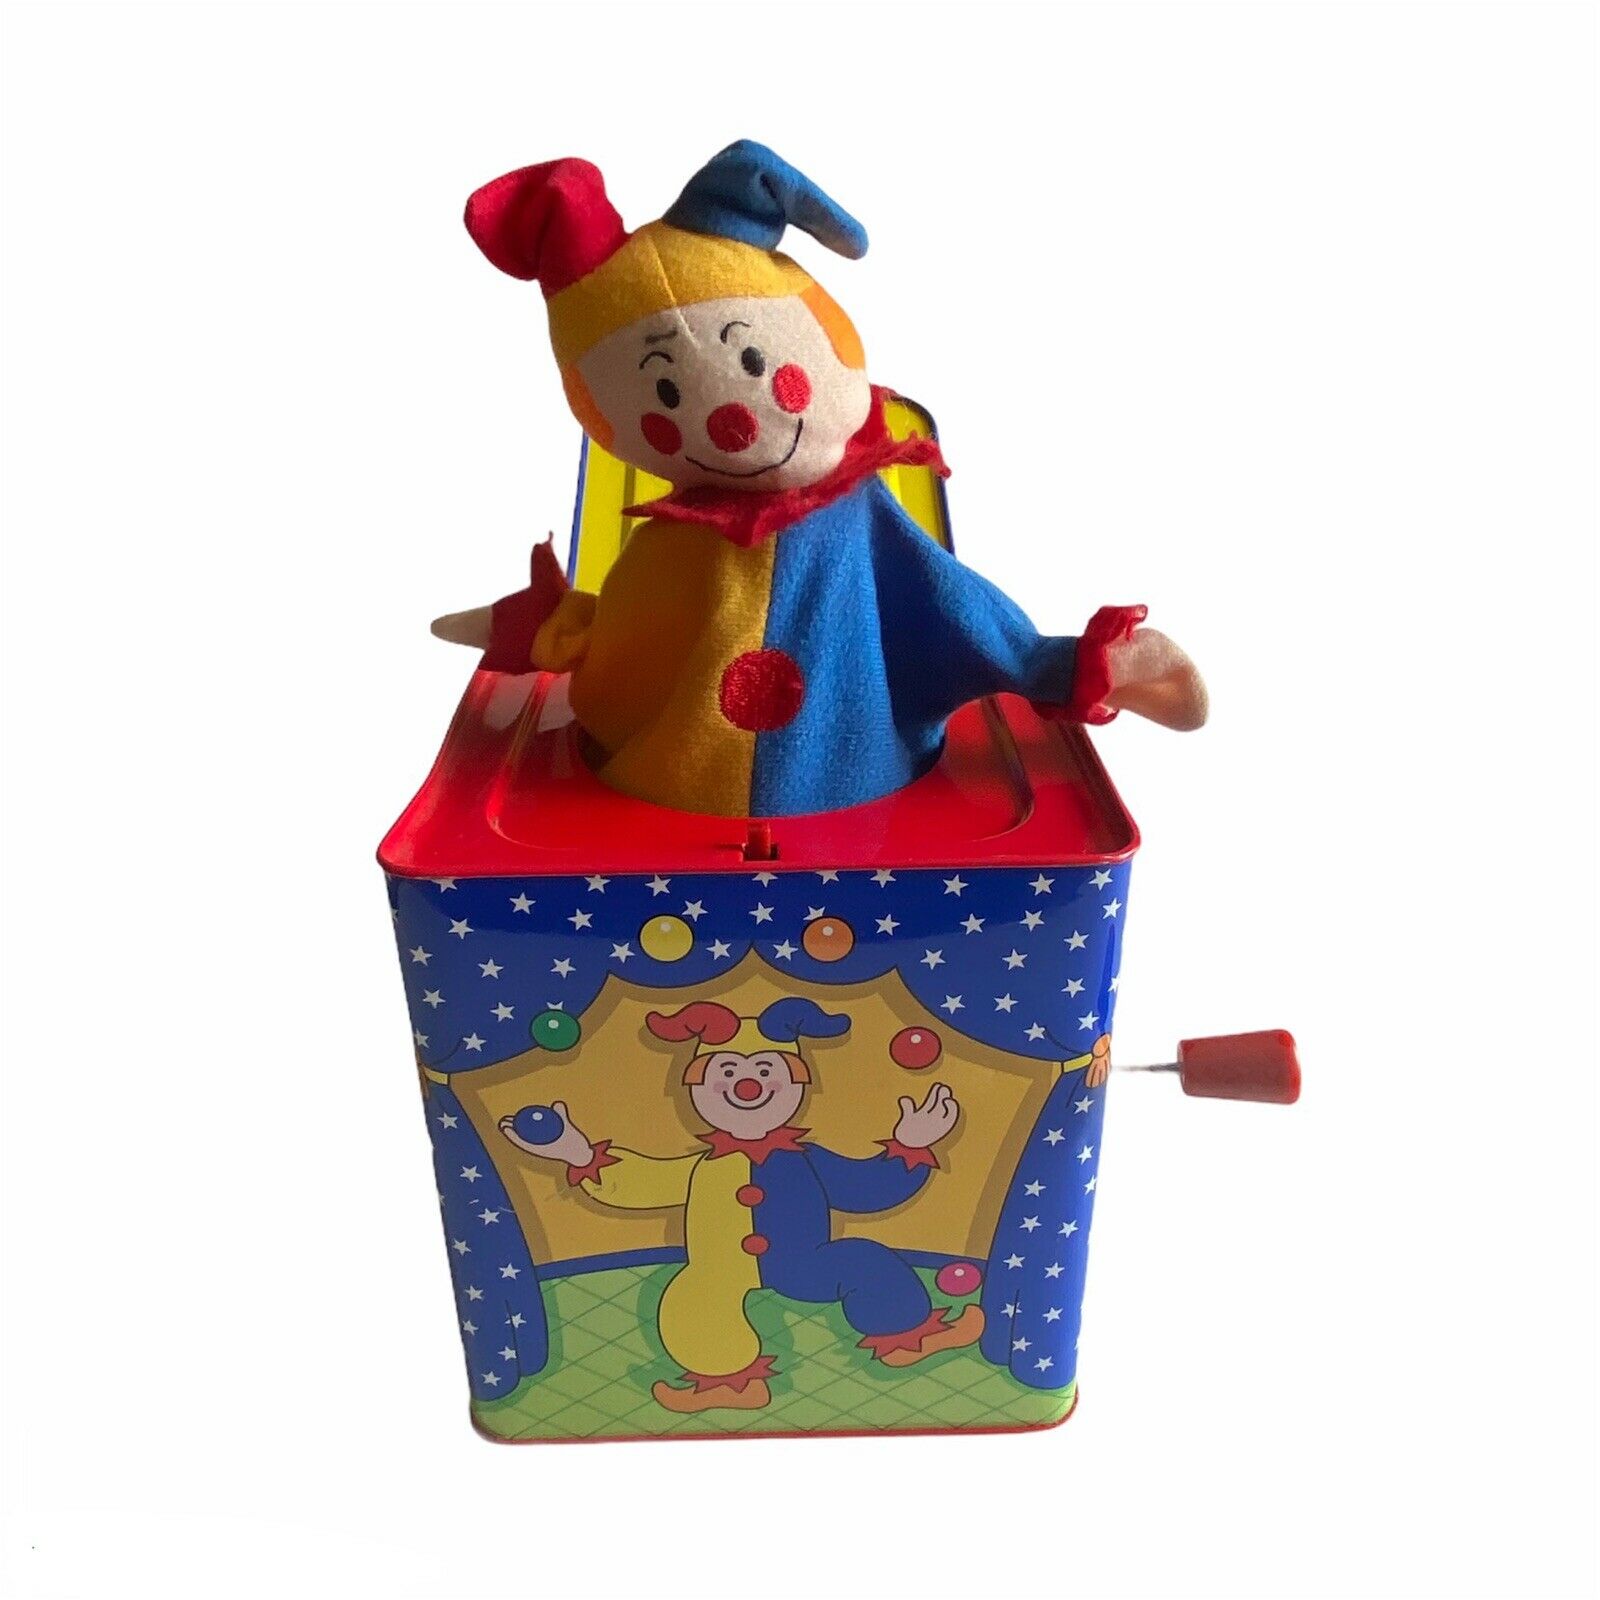 Jack In The Box Toy Jester Jack In The Box 1997 Schylling Vintage Collectible